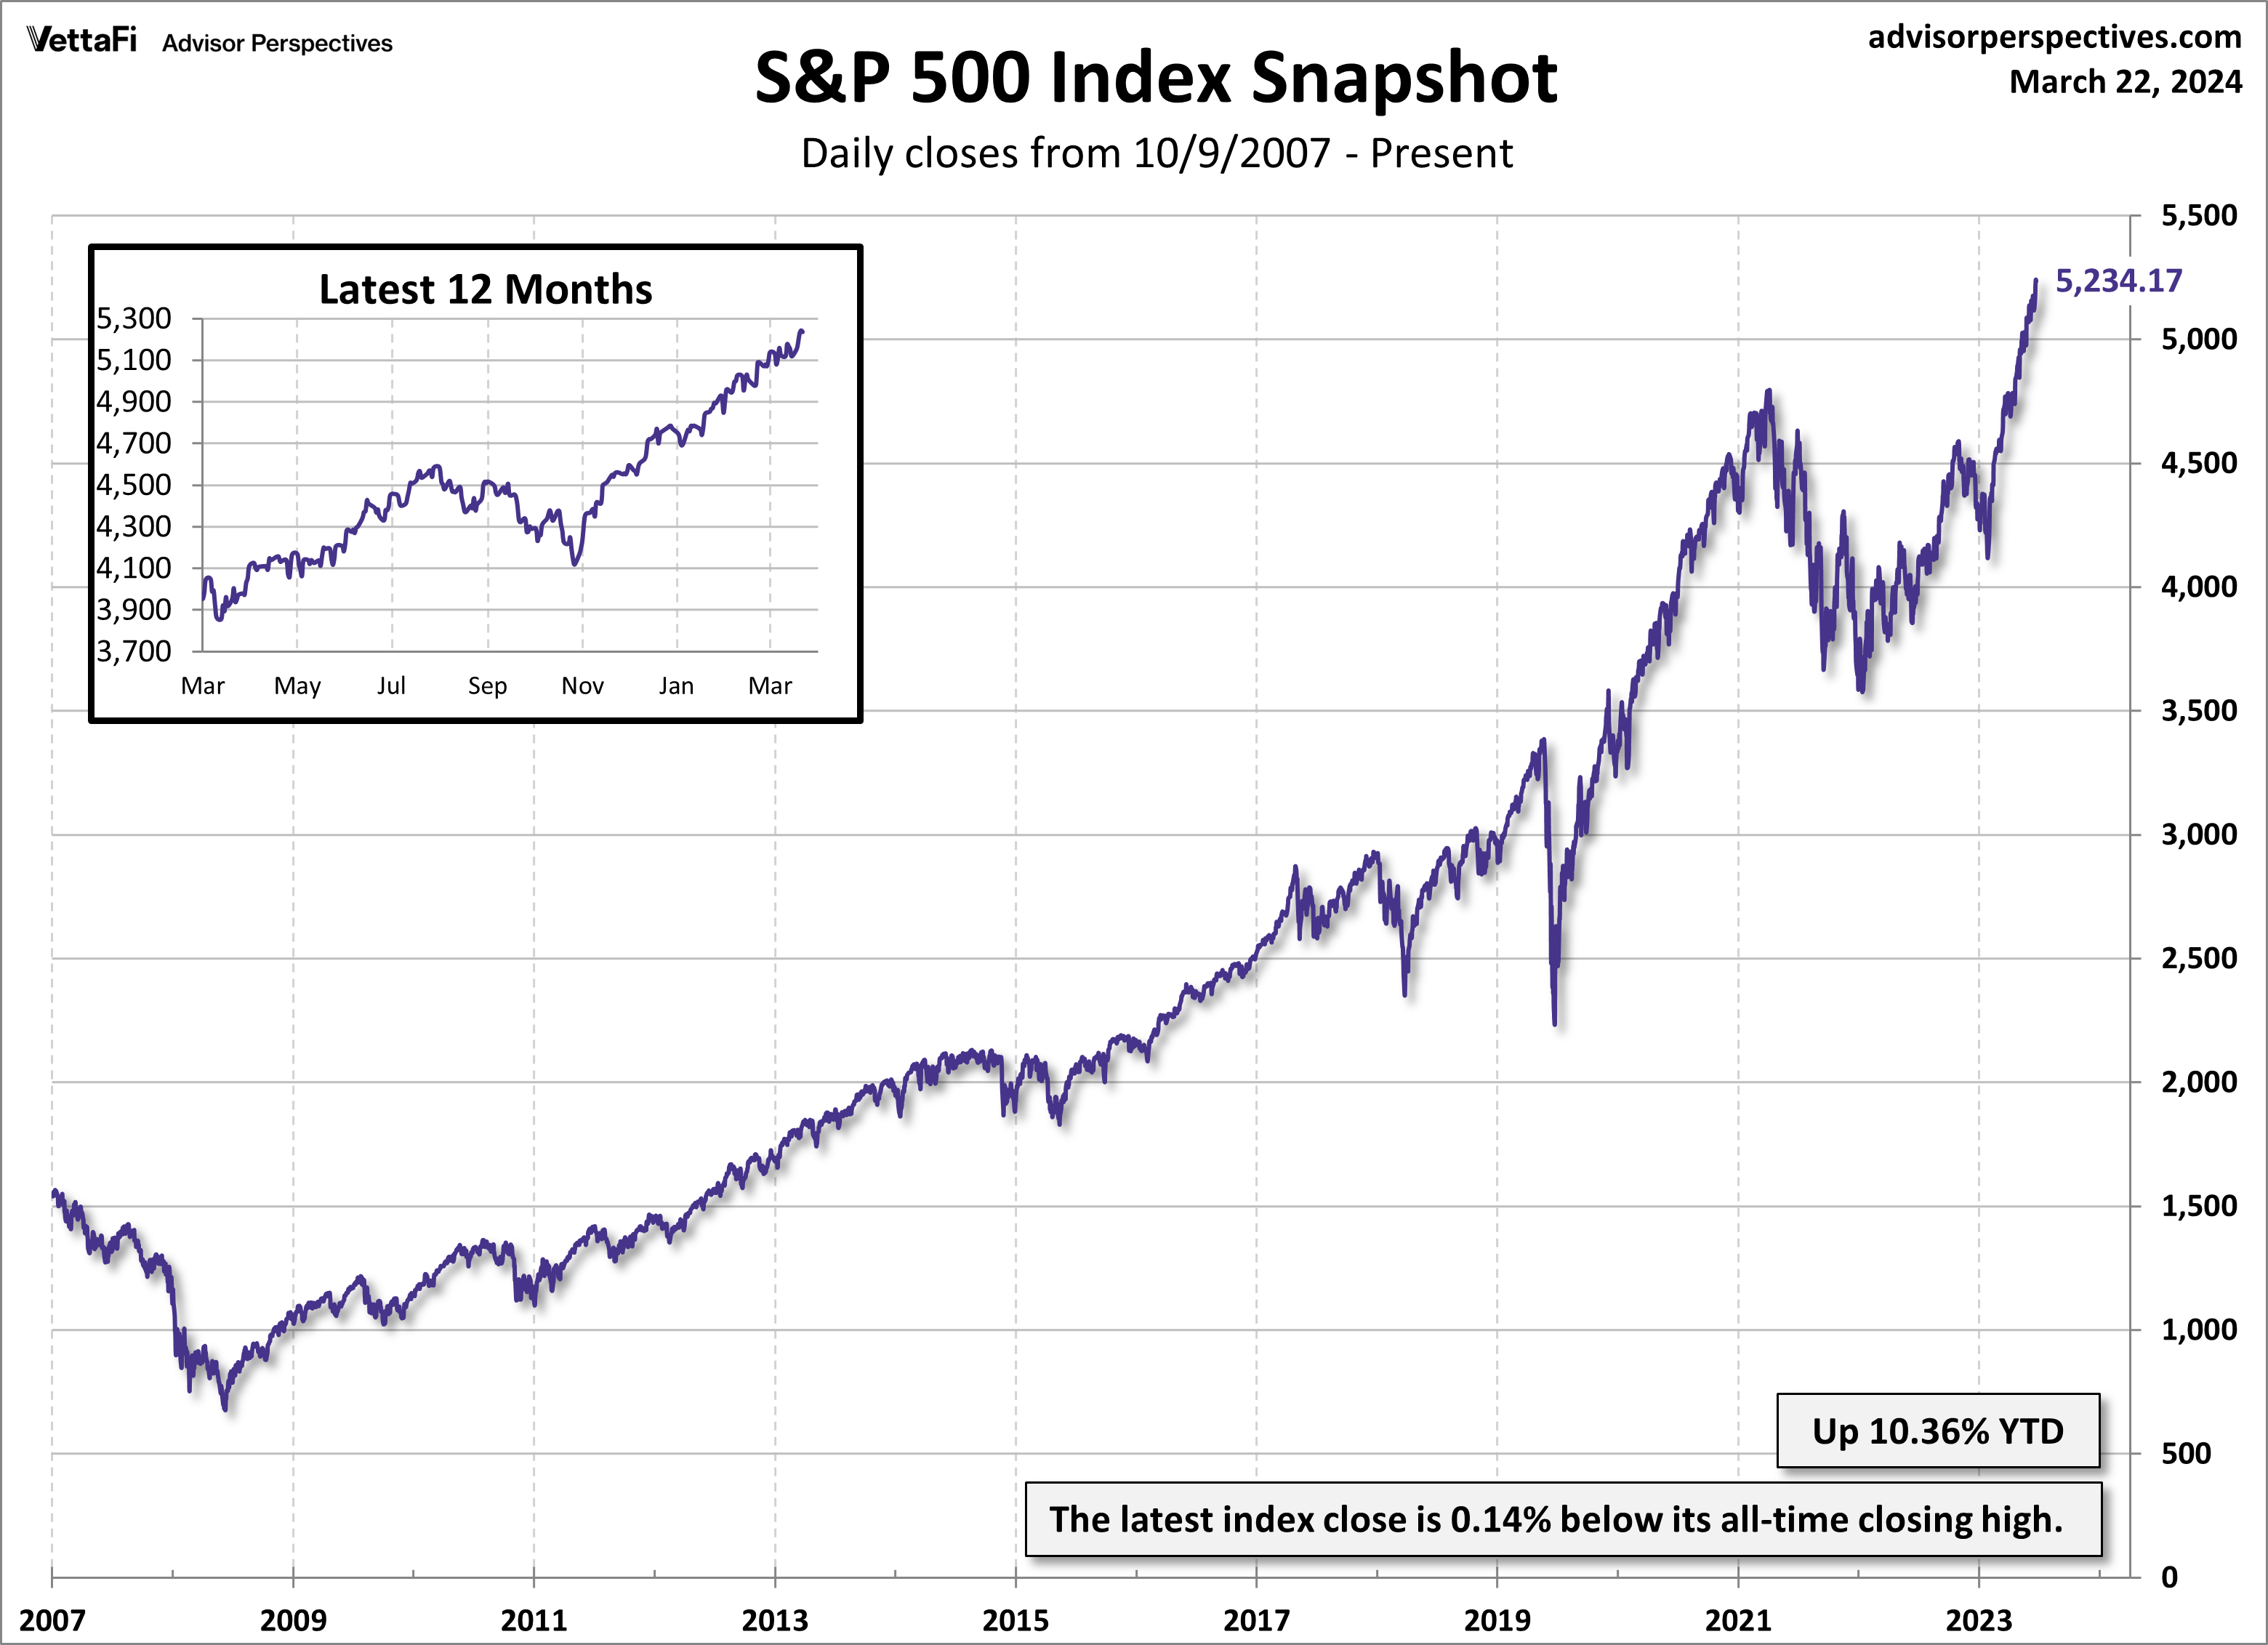 SP 500 Index Snapshot_Daily closes from Oct. 9, 2007 - Present